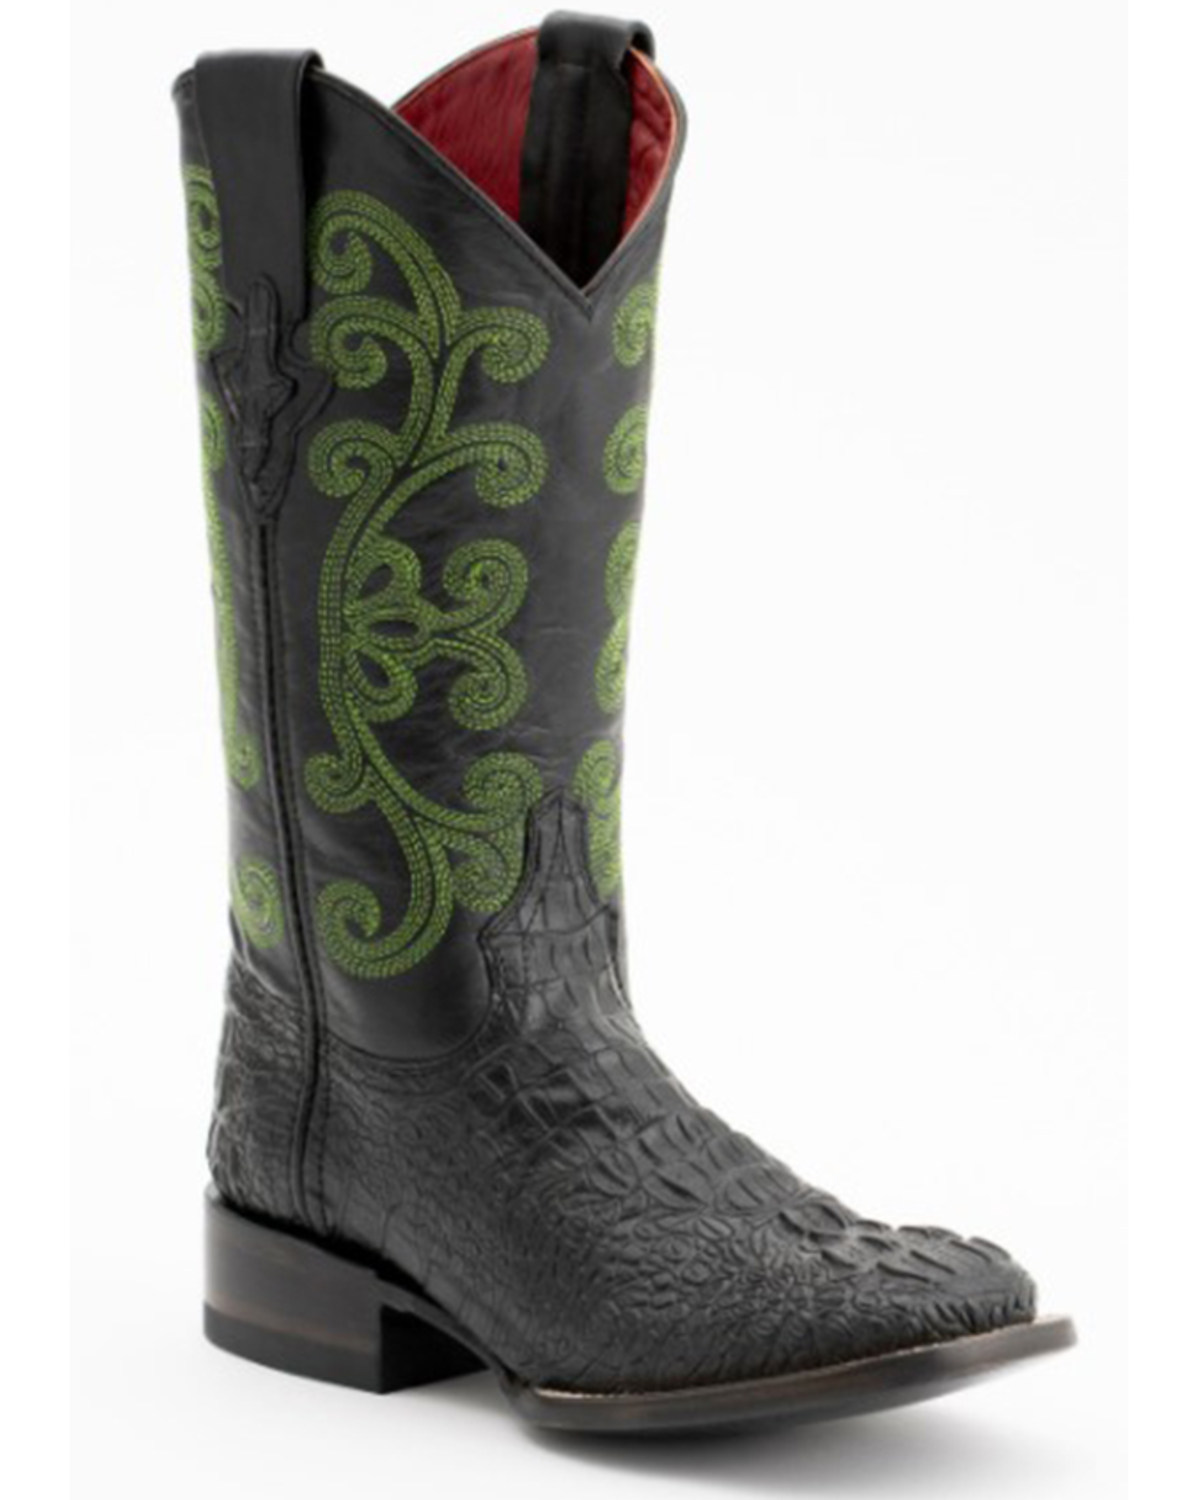 croc western boots